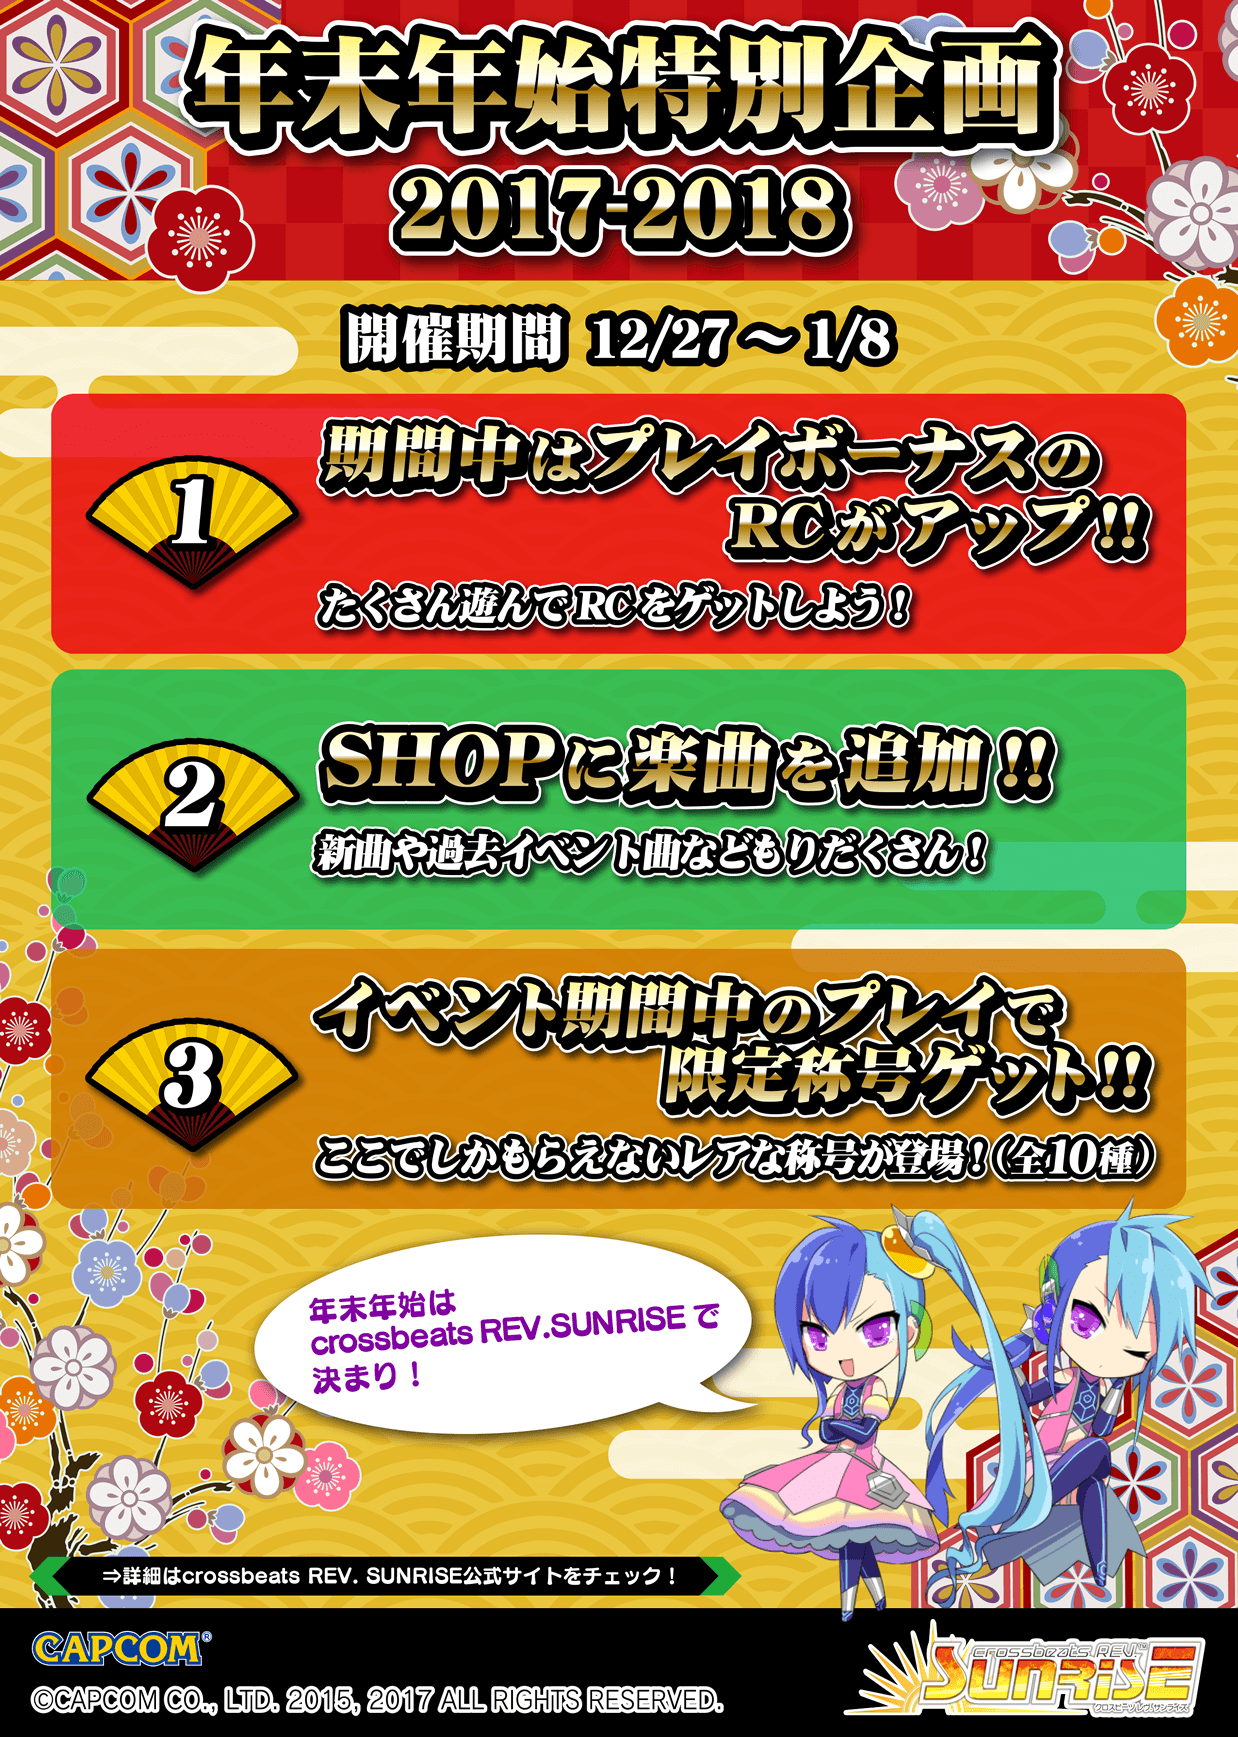 event_banner_news_2017-2018_1225.png